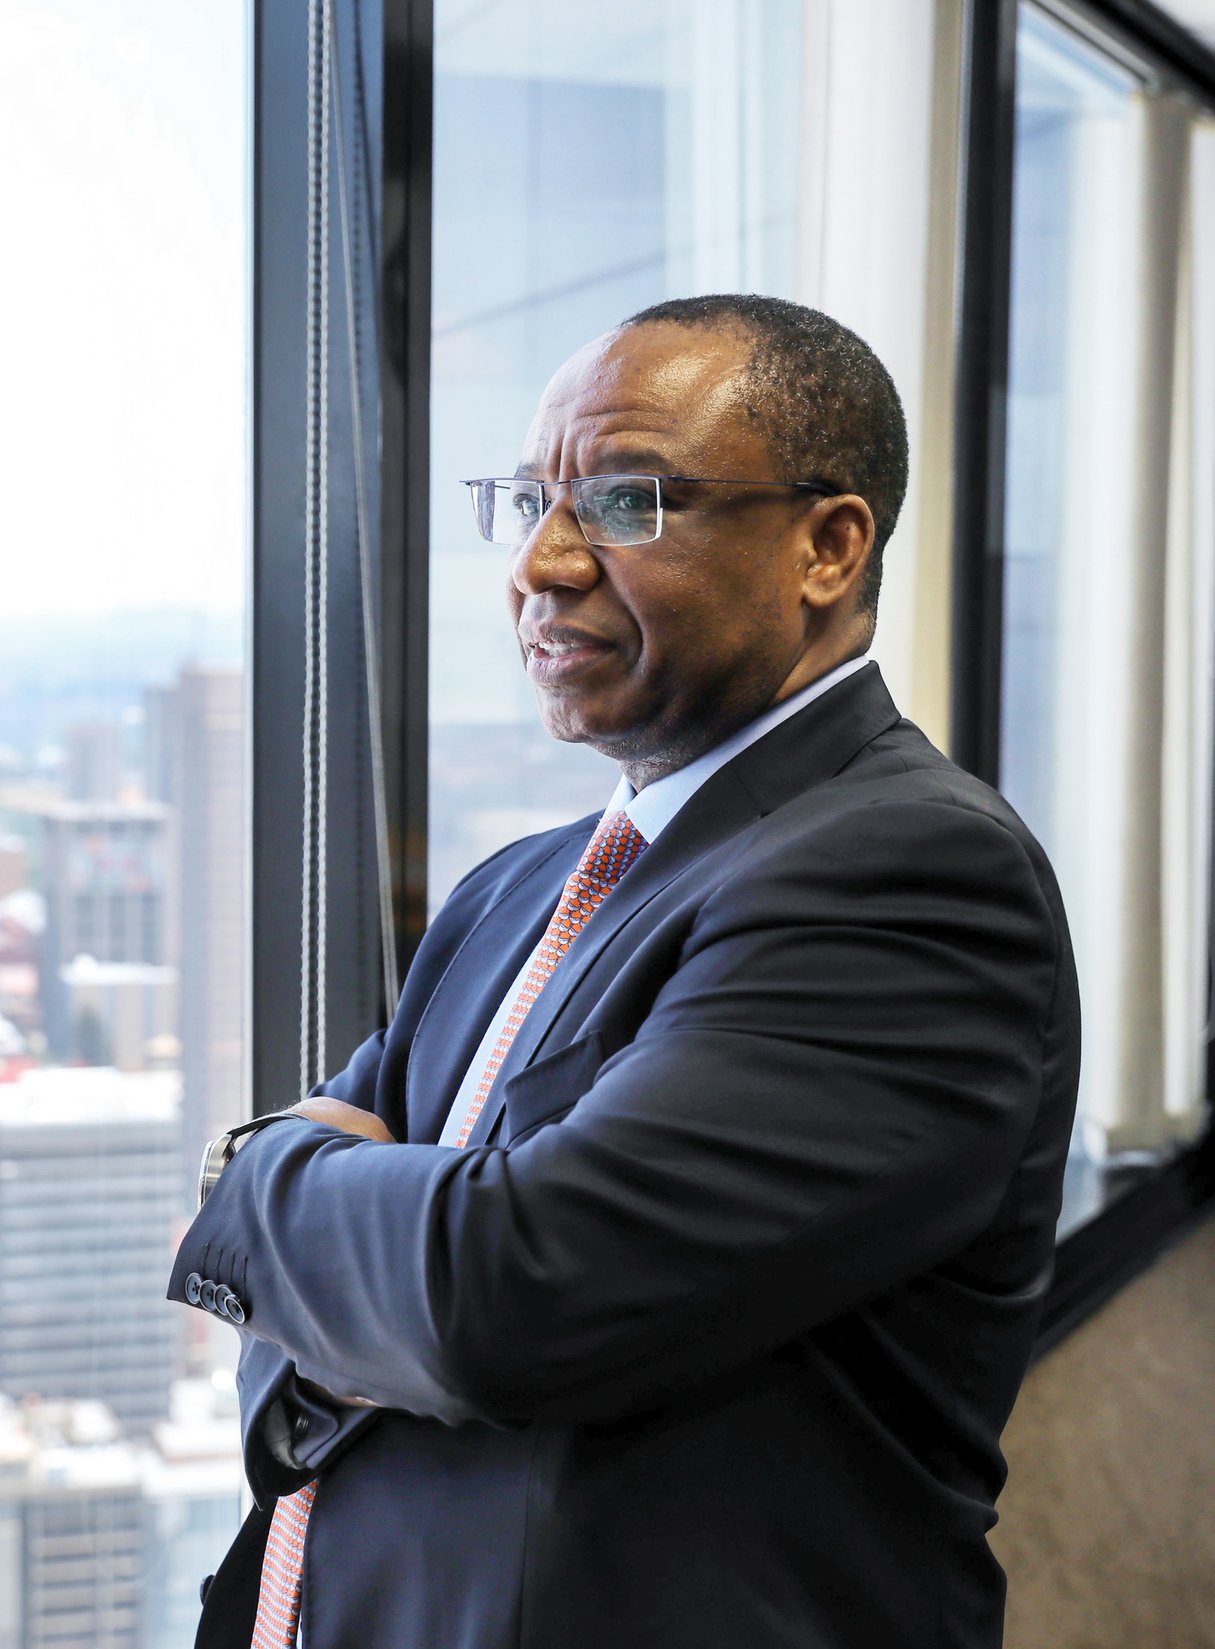 2eme photoJOHANNESBURG, SOUTH AFRICA FEBRUARY 01: Reserve Bank deputy governor Daniel Mminele opens up during an interview on February 01, 2019 in Johannesburg, South Africa. Mminele said that, monetary policy is not a cure-all the economy and that the countrys structural challenges cannot be addressed by the reserve bank. (Photo by Simphiwe Nkwali/Gallo Images via Getty Images) &copy; S. Nkwali / Gallo Images